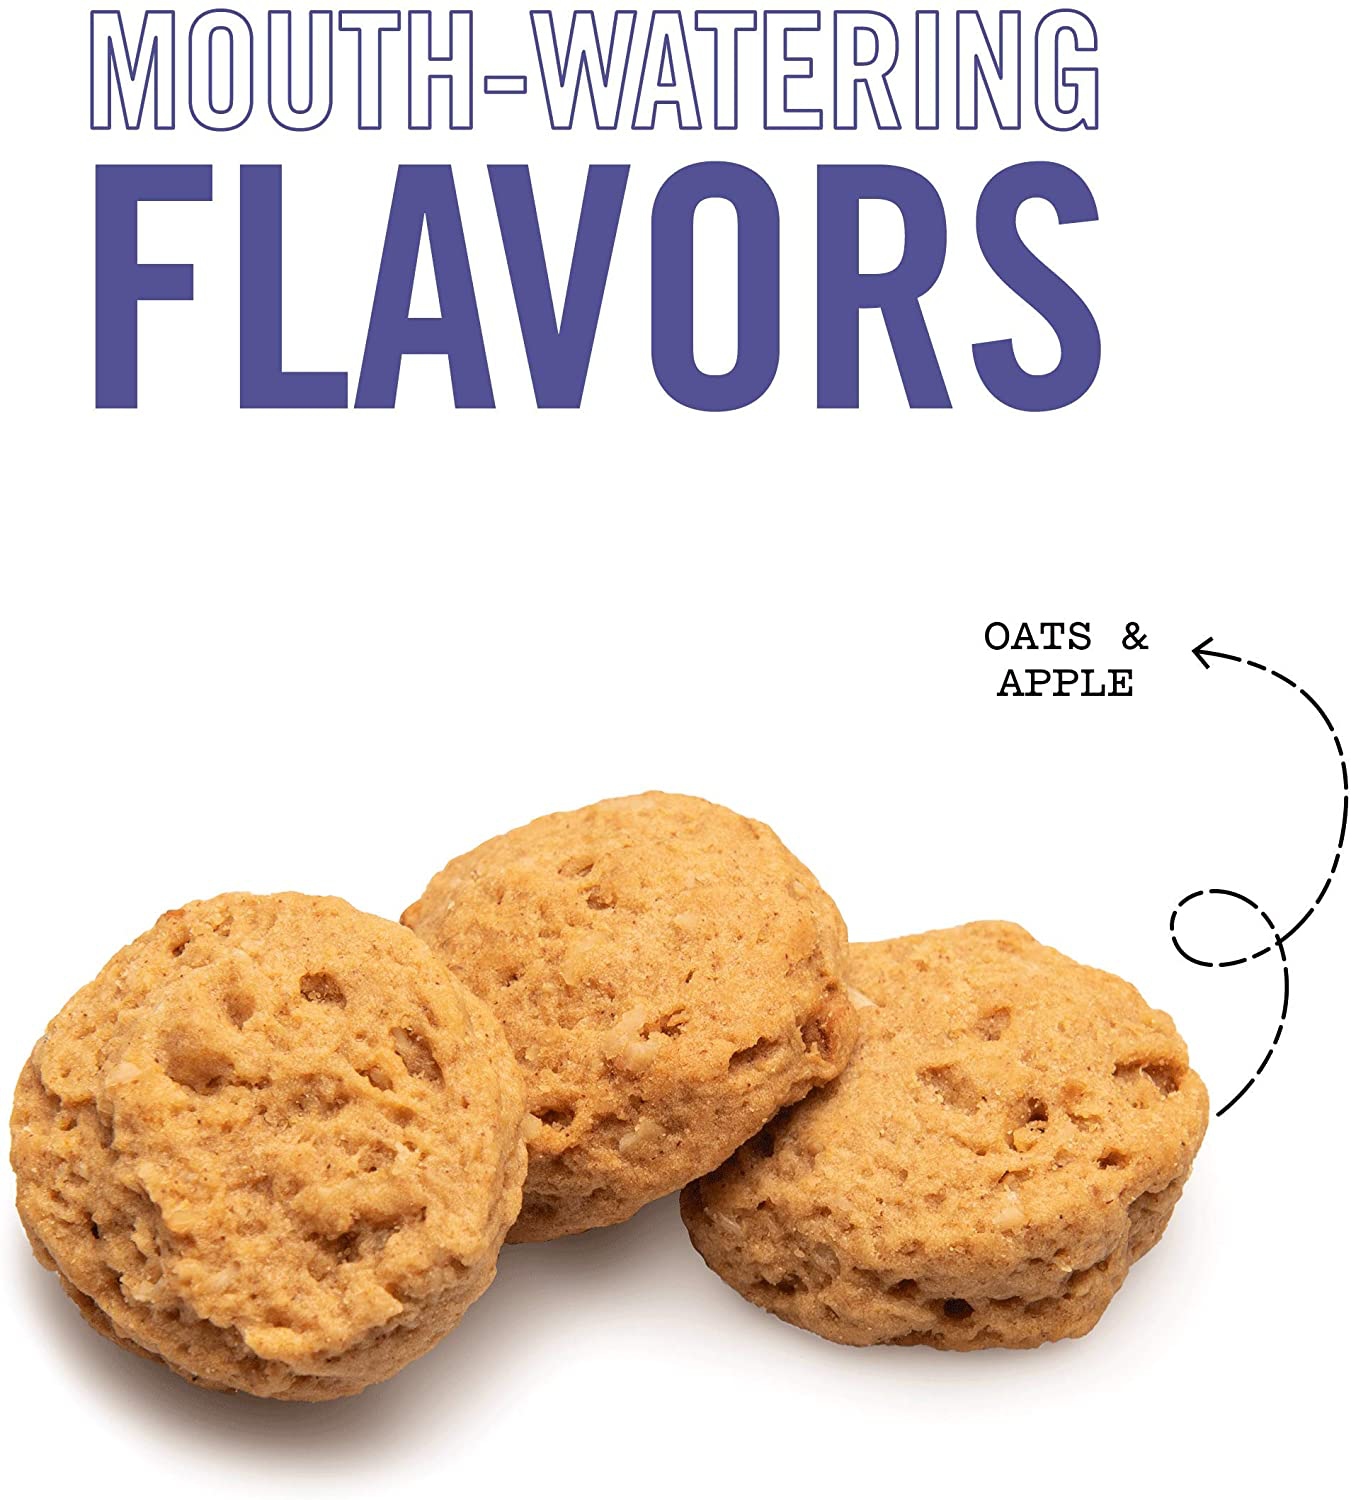 Three Dog Bakery Soft Baked Classic Cookies with Oats and Apple, Premium Treats for Dogs, 13 Ounce Box (114334) Animals & Pet Supplies > Pet Supplies > Dog Supplies > Dog Treats Three Dog Bakery   